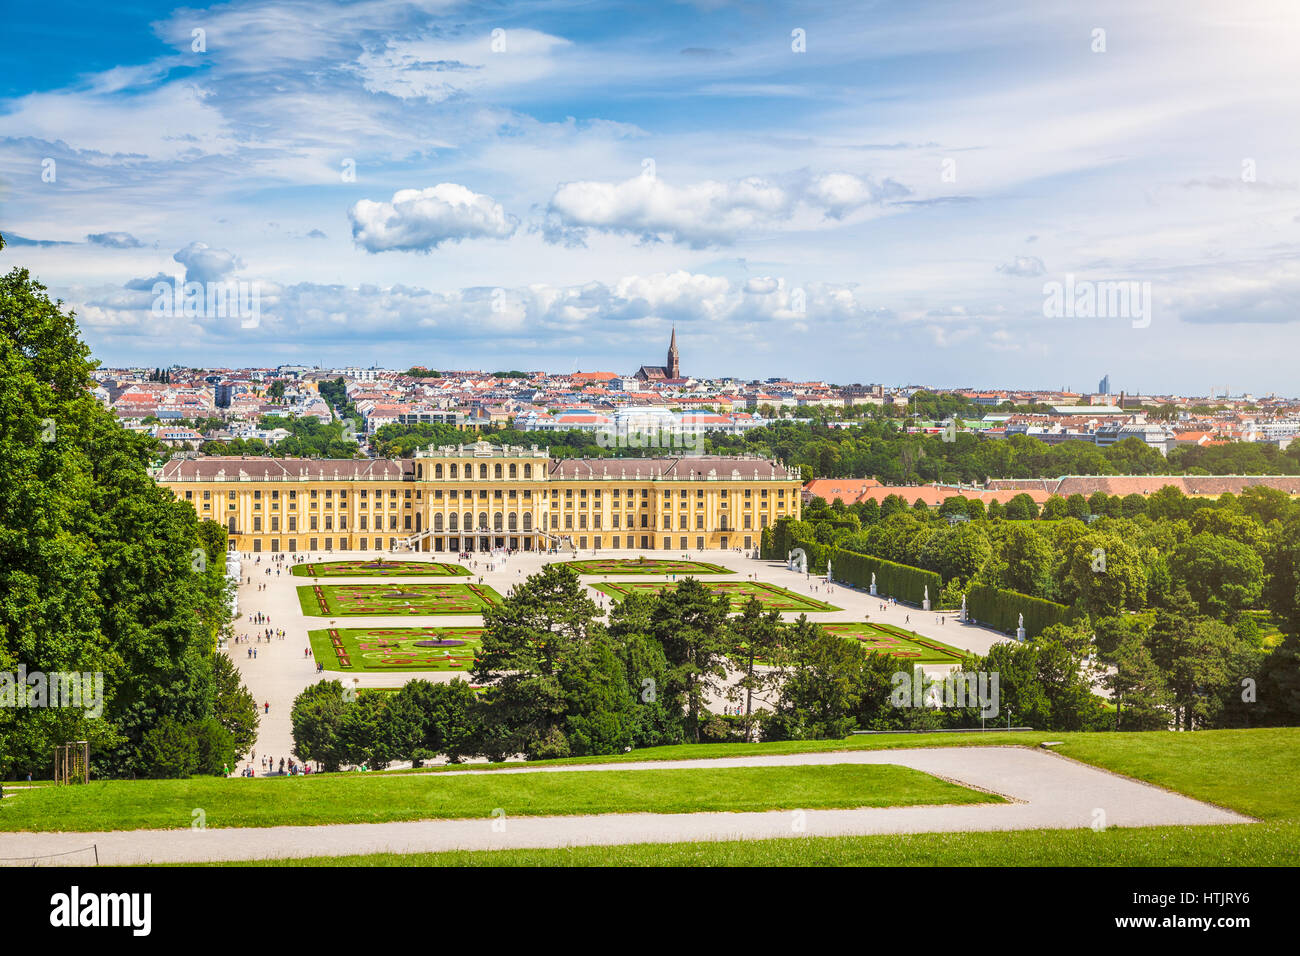 Classic view of famous Schonbrunn Palace with scenic Great Parterre garden on a beautiful sunny day with blue sky and clouds in summer, Vienna, Austri Stock Photo